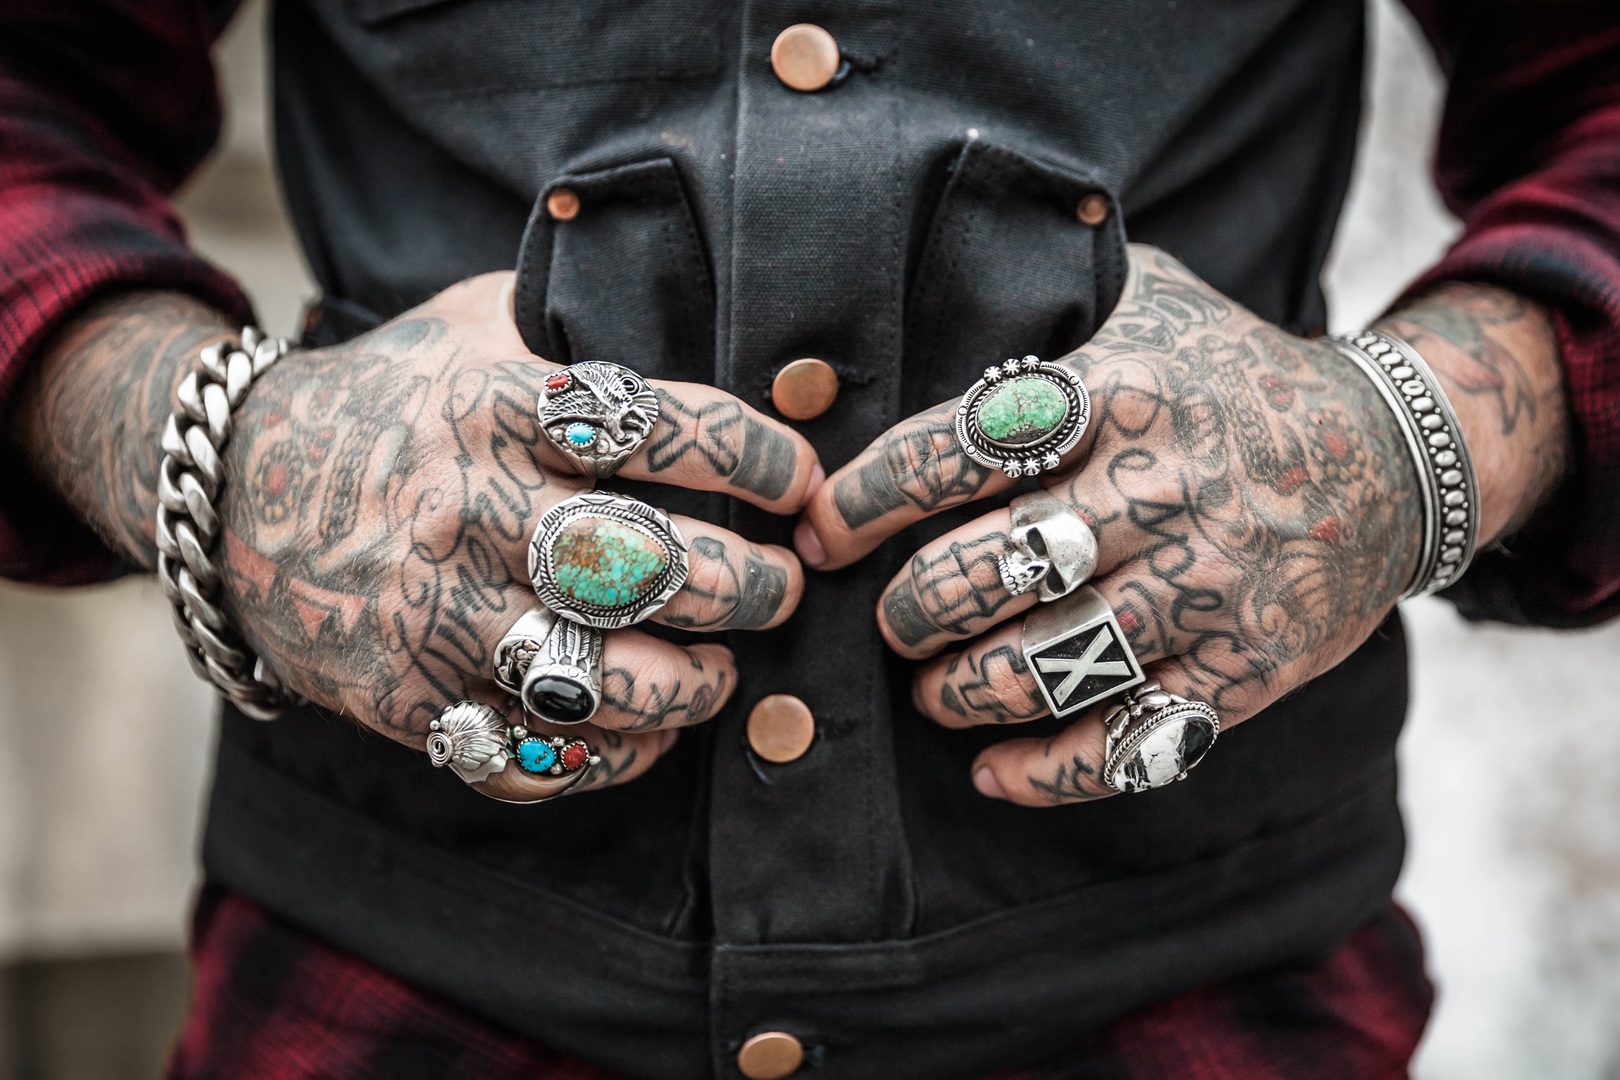 Tattoo is a Form of Body Modification.